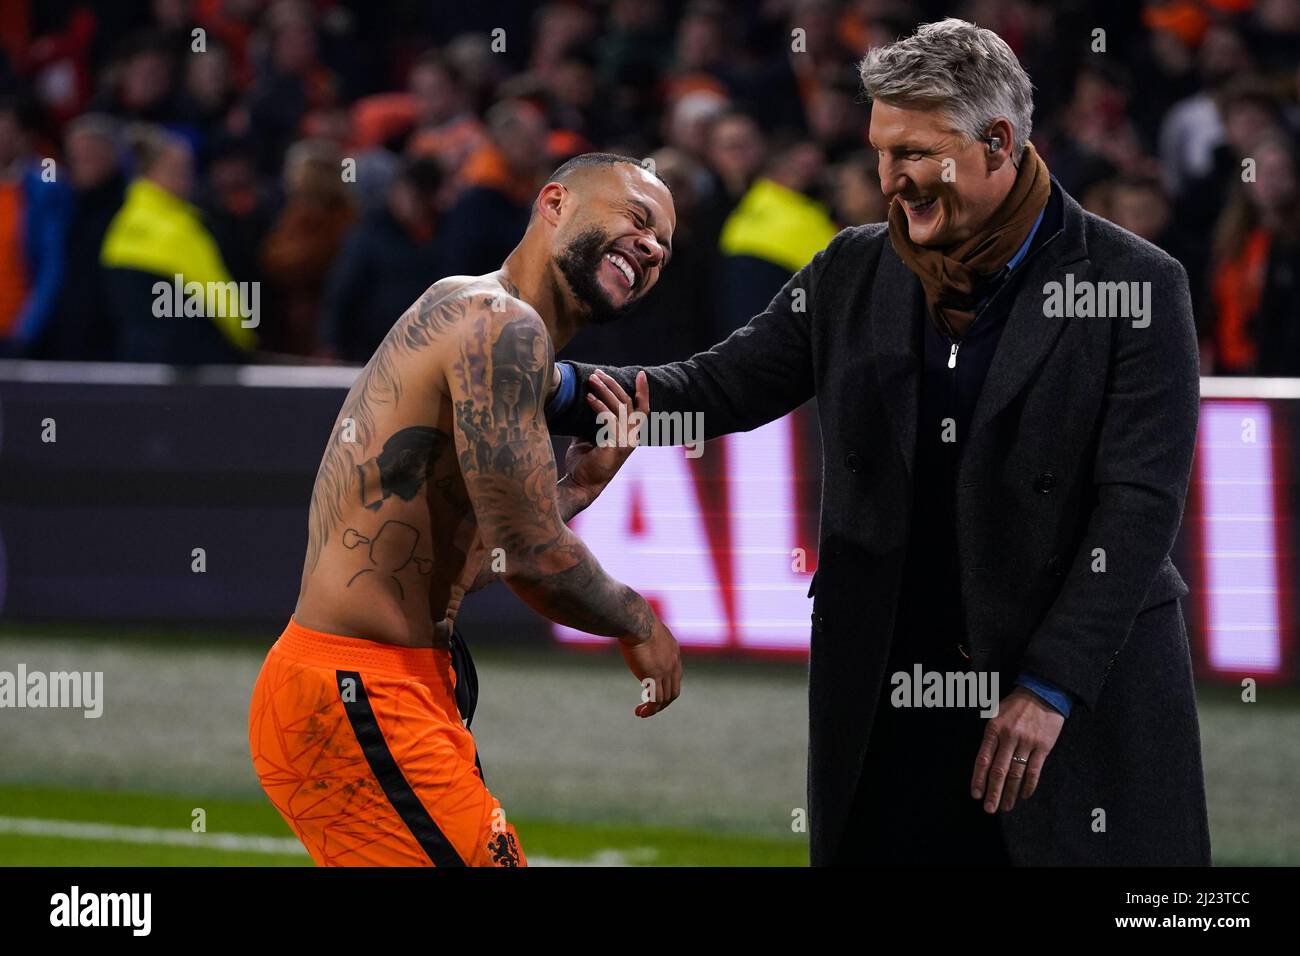 AMSTERDAM, NETHERLANDS - MARCH 29: Tattoo from Memphis Depay of the  Netherlands during the International Friendly match between the Netherlands  and Germany at the Johan Cruijff ArenA on March 29, 2022 in